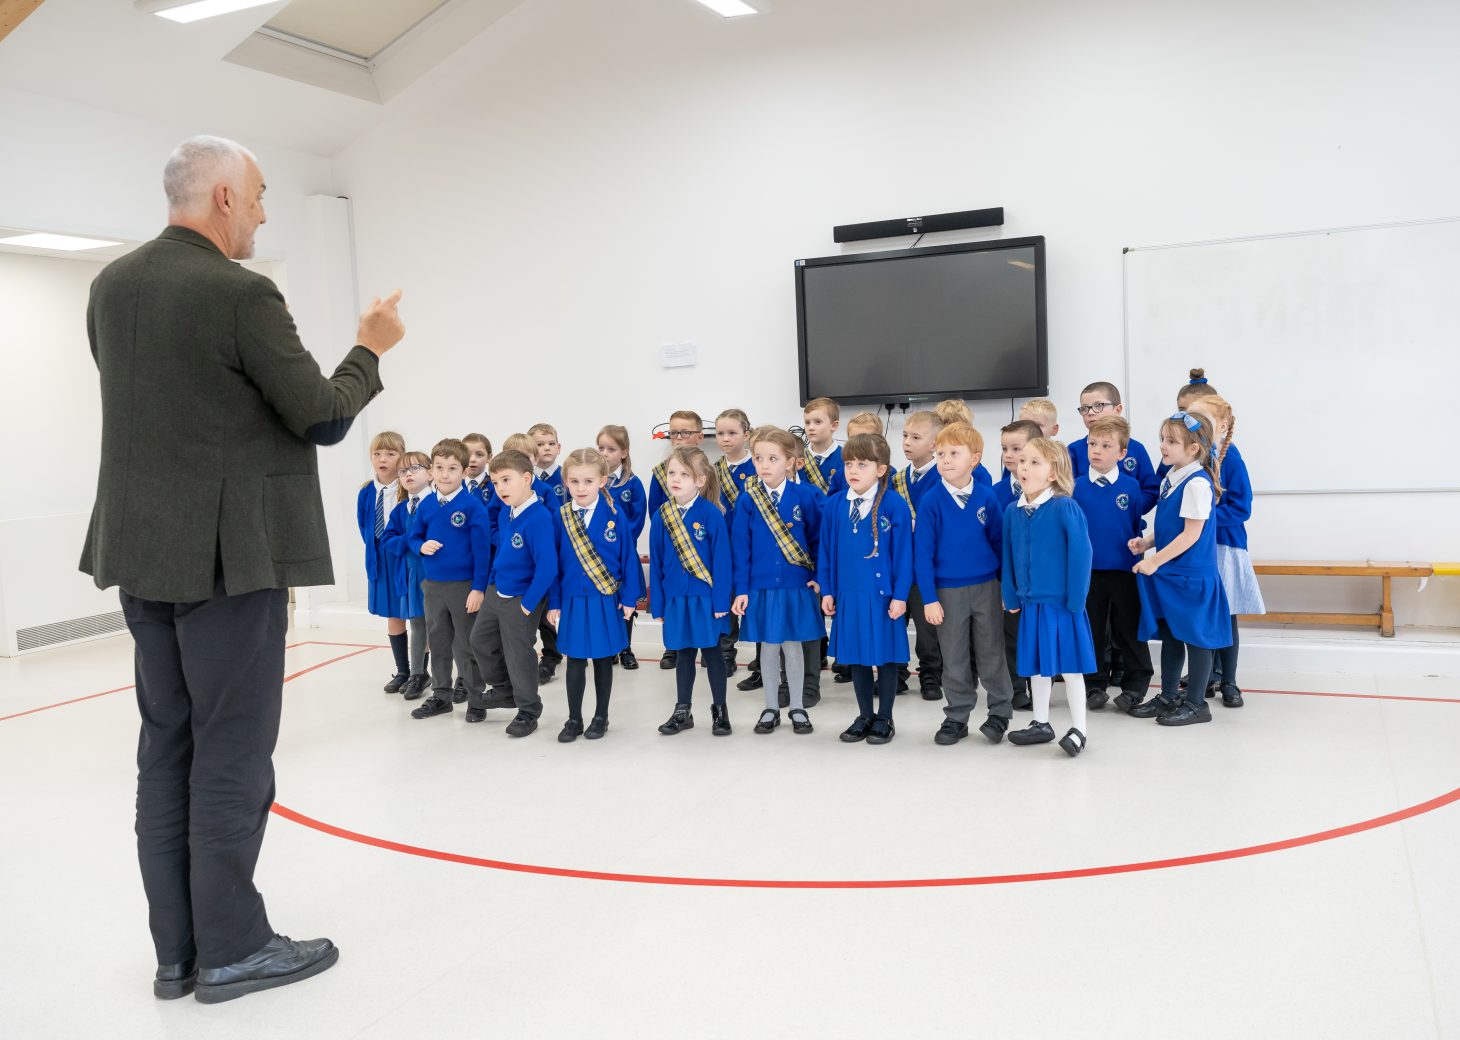 Go Cornish Schools joined together in song to celebrate 20th anniversary of recognition of the Cornish Language